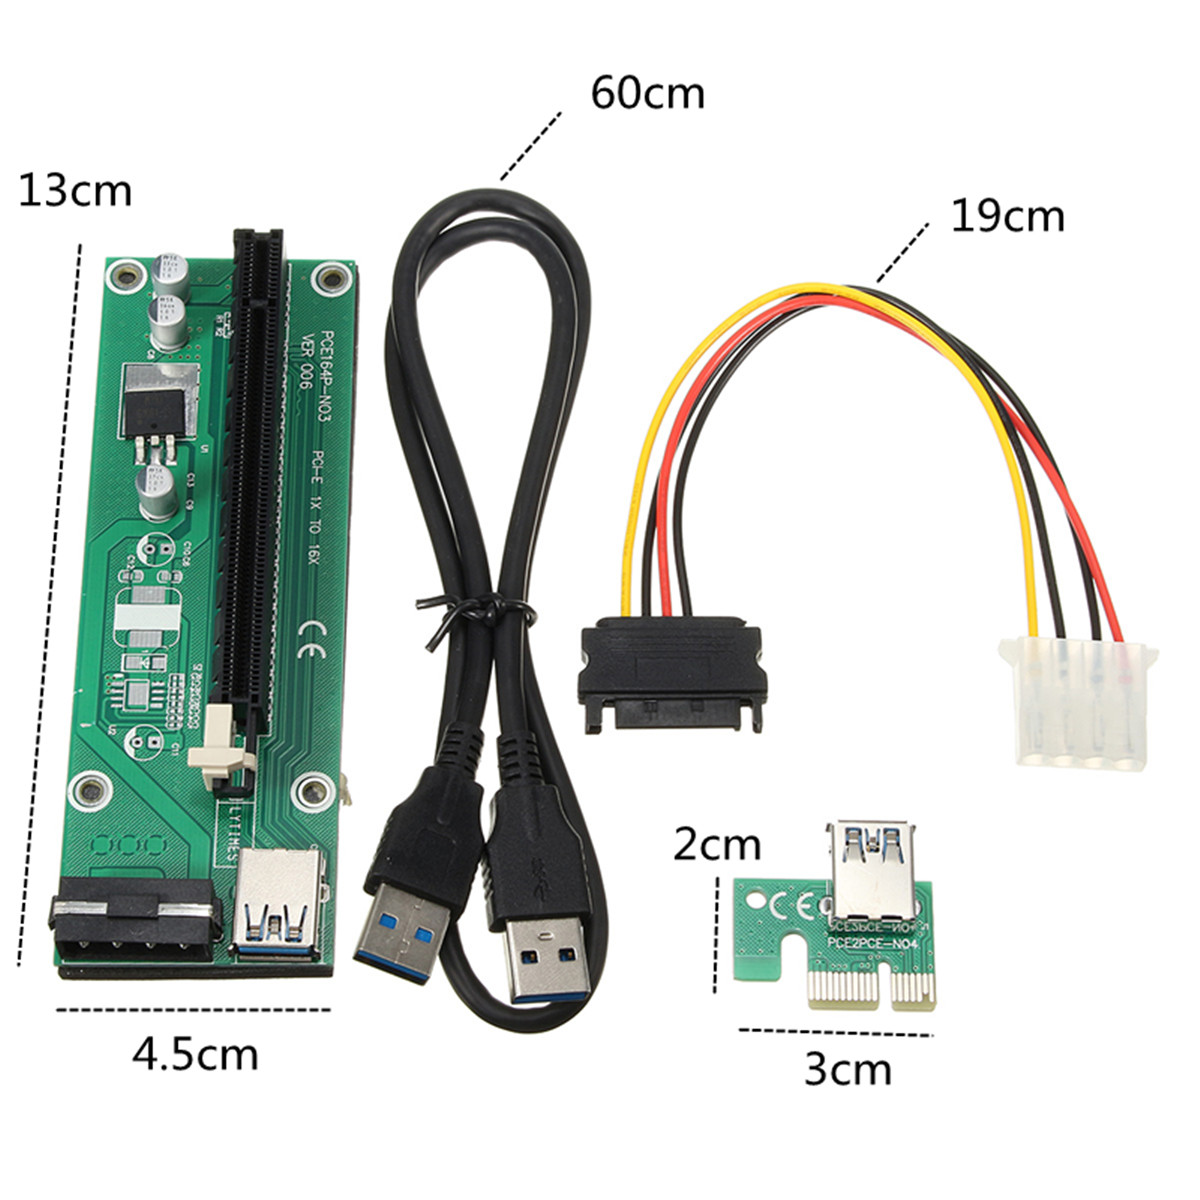 USB 3.0 PCI-E Express 1x to16x Extension Cable Extender Riser Board Card Adapter SATA Cable